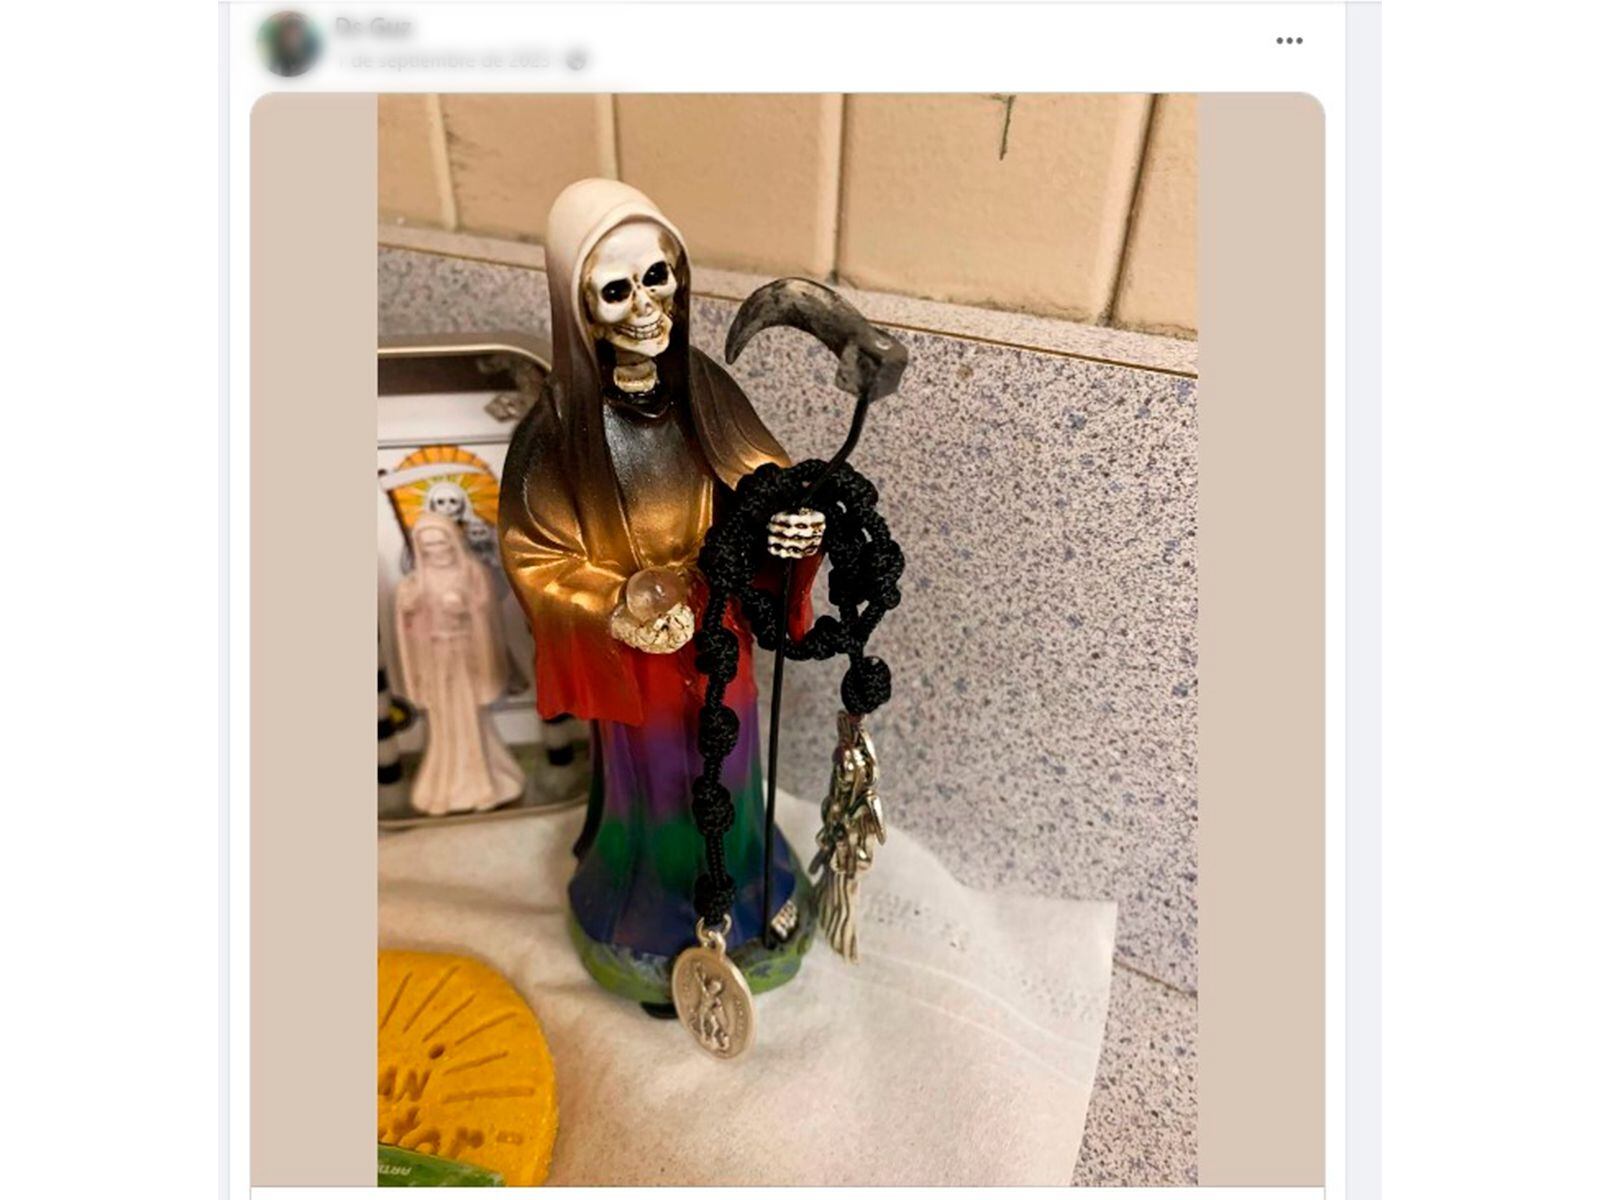 An image of Santa Muerte shared by 'El Gus' on his Facebook profile.